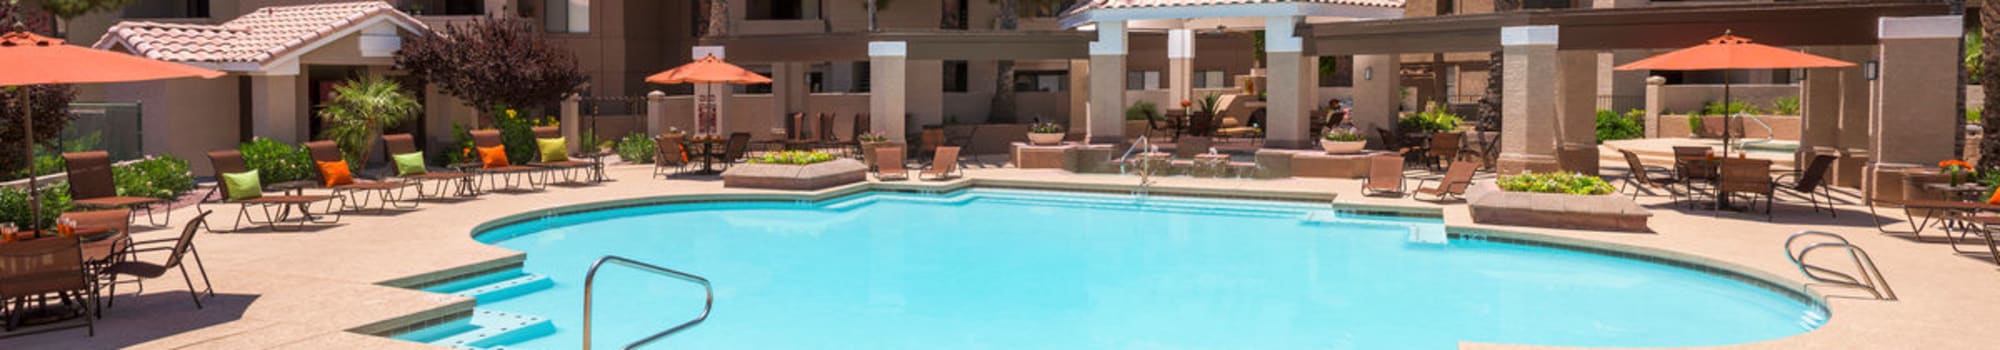 Reviews at The Palisades in Paradise Valley in Phoenix, Arizona